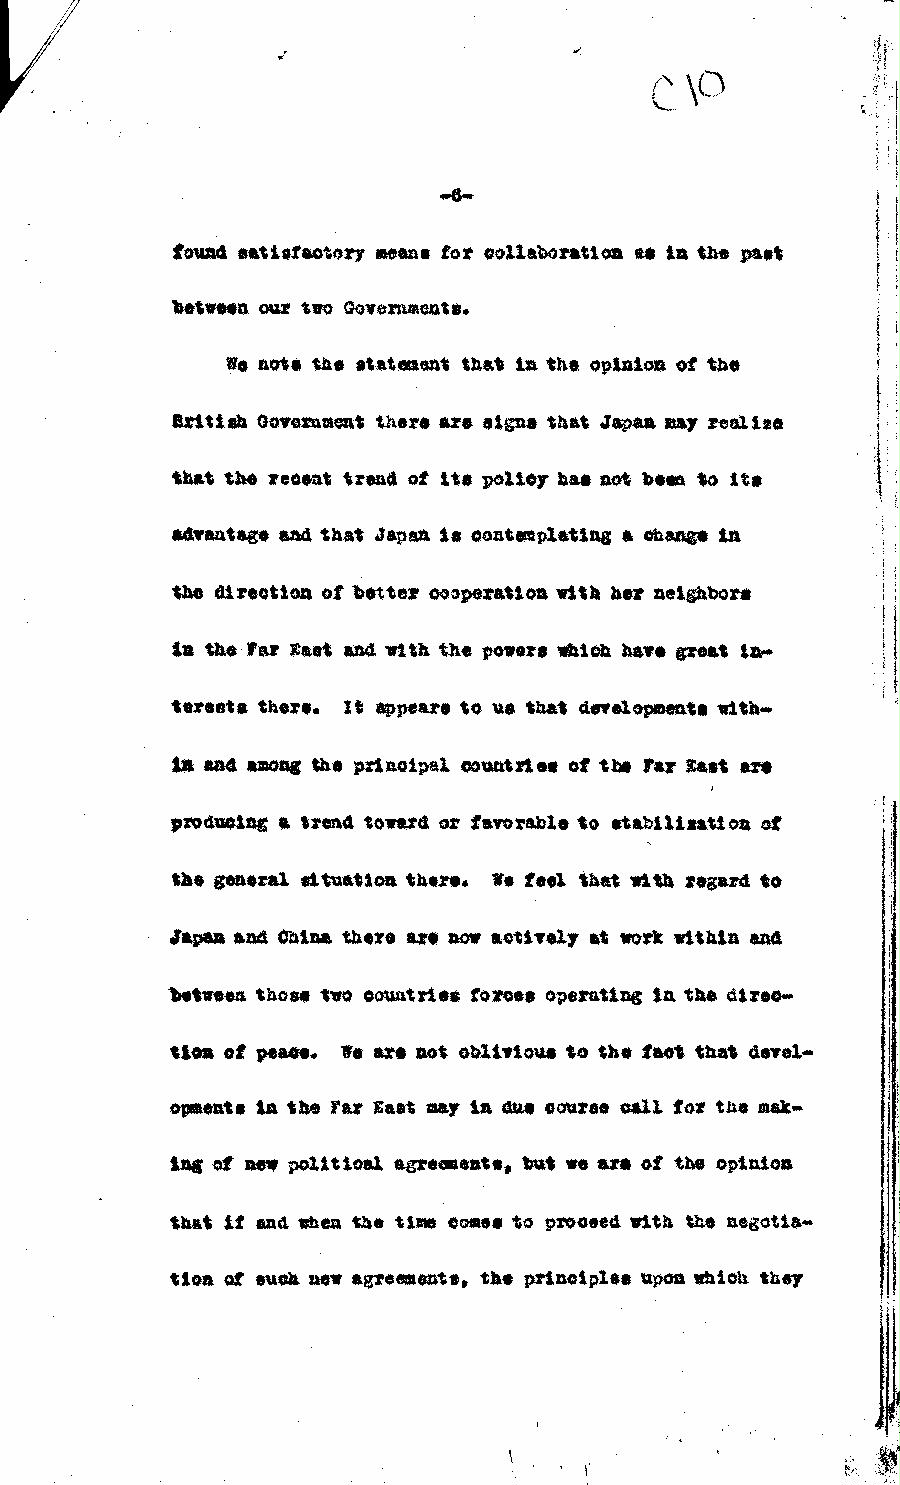 [a303c10.jpg] - Cont-memo from Dept. of State5/28/37